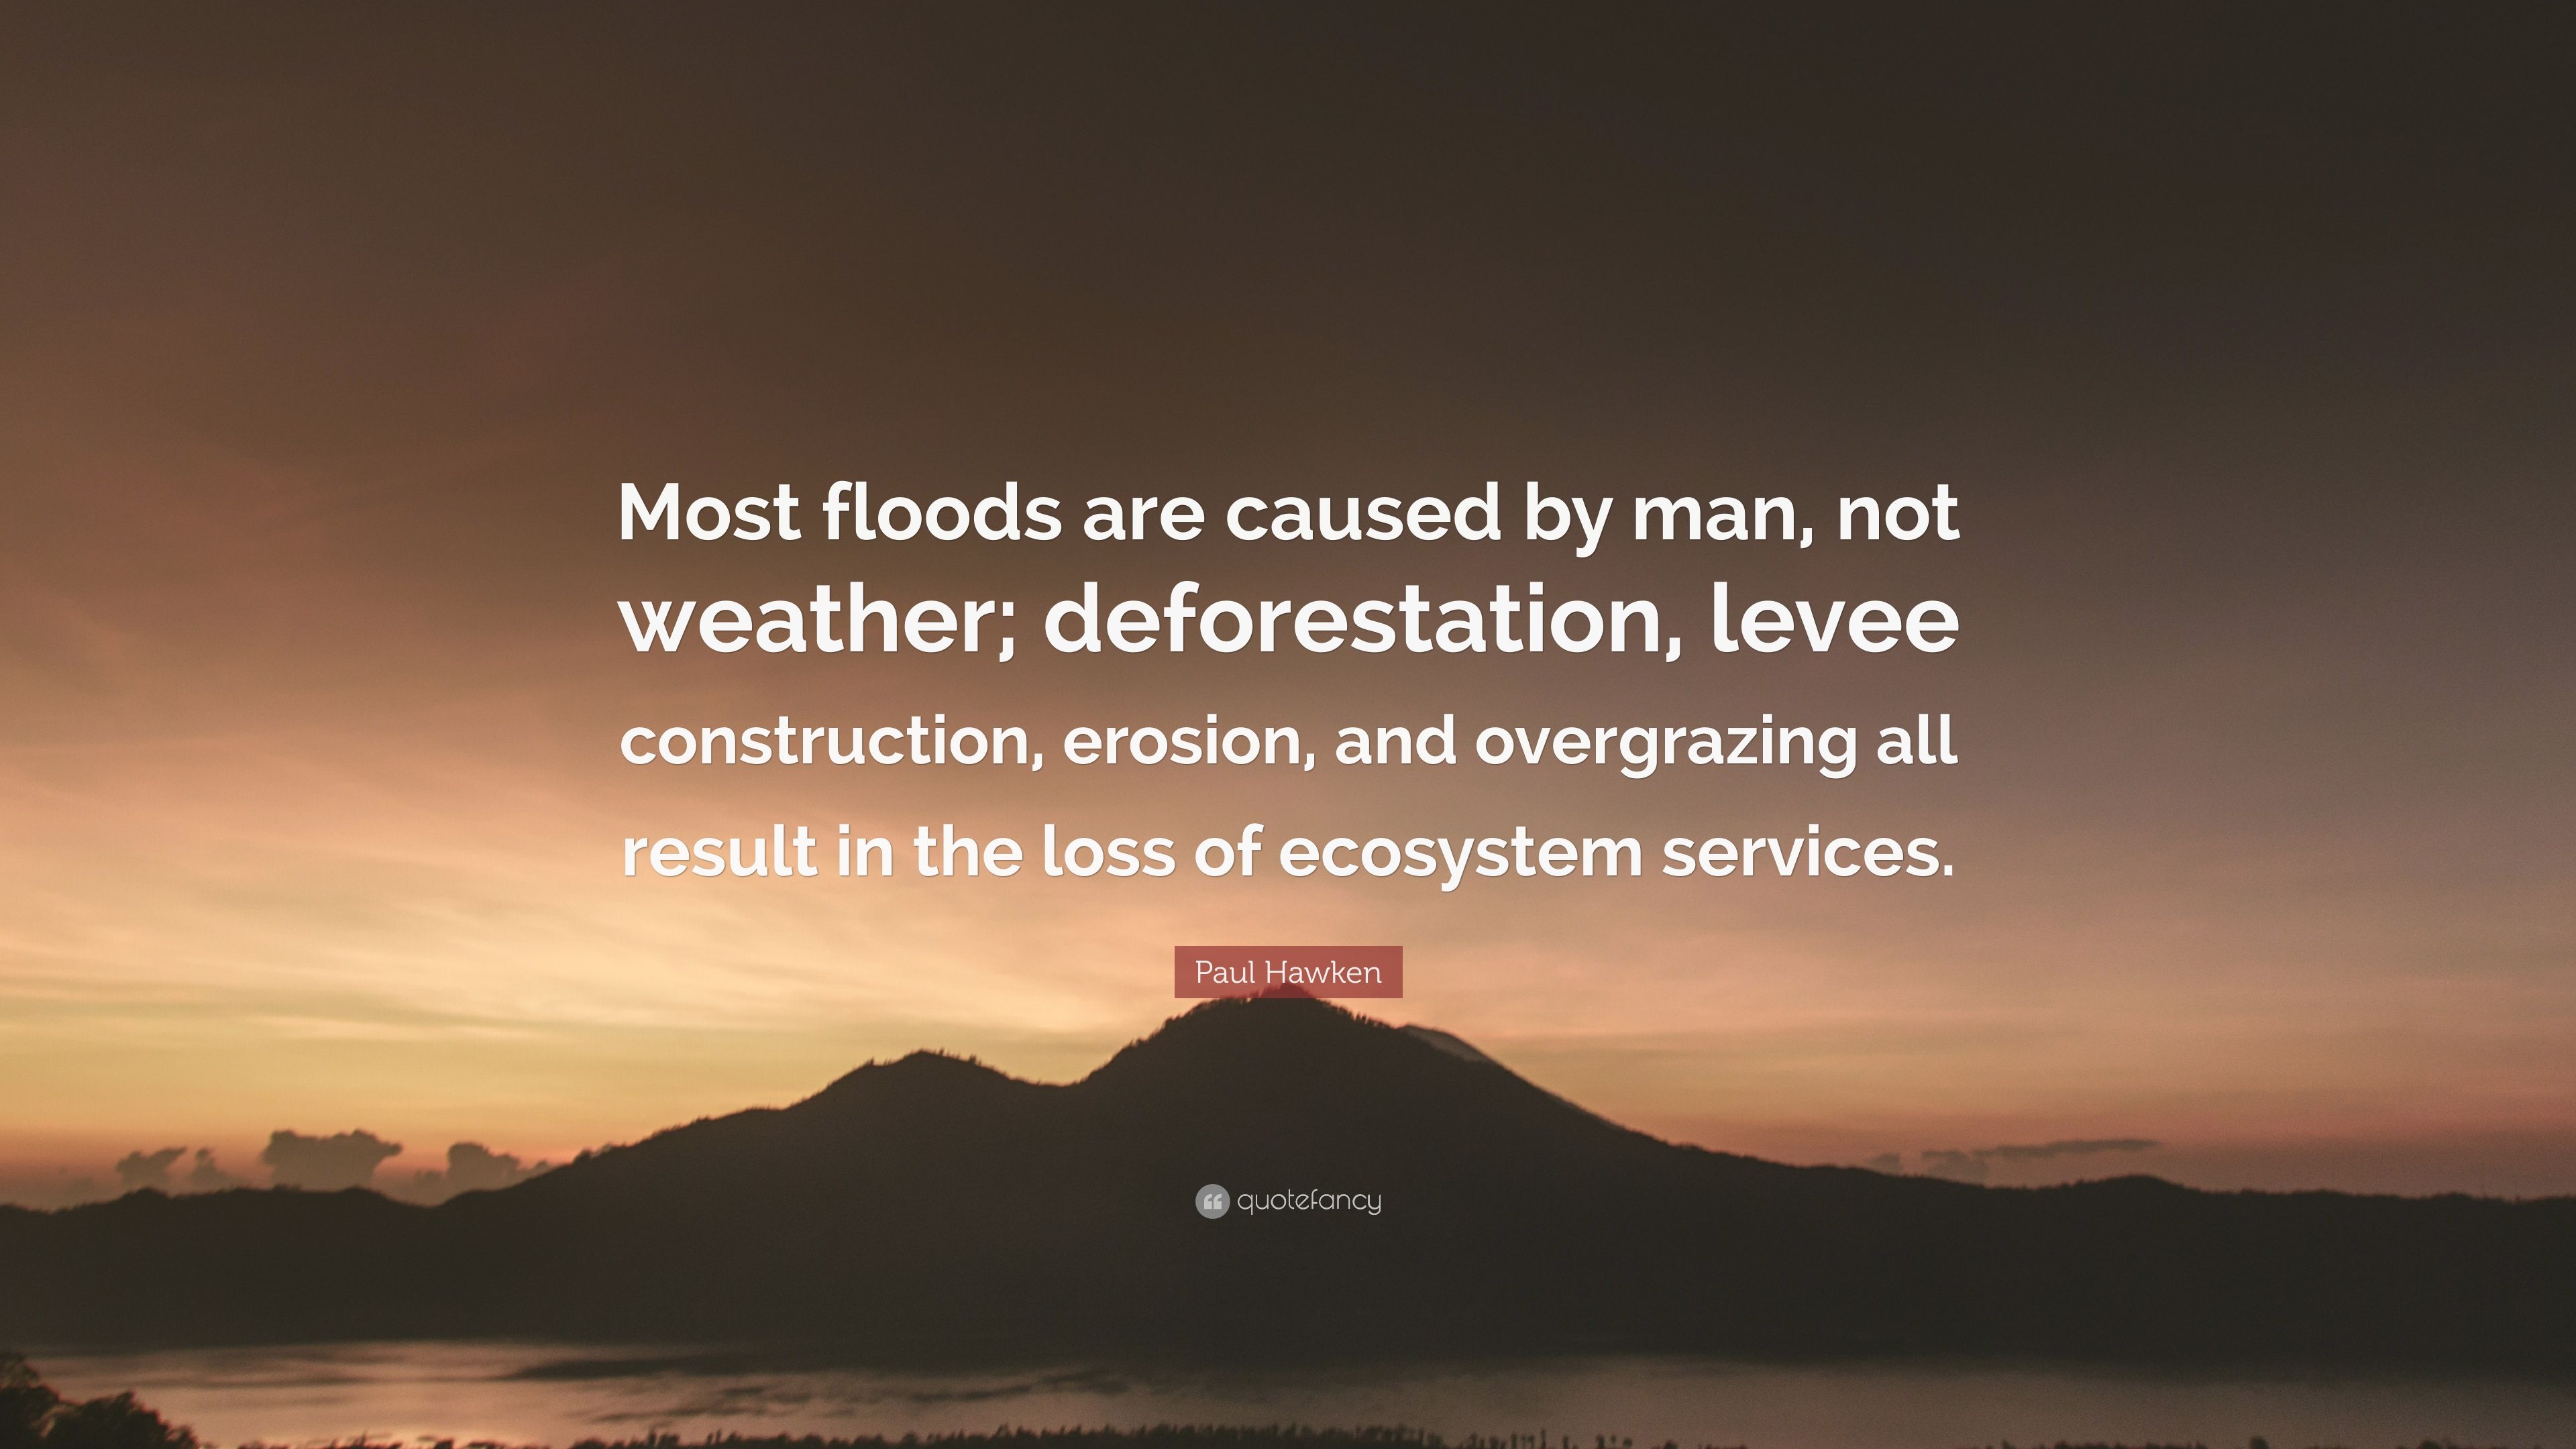 Paul Hawken Quote: “Most floods are caused by man, not weather